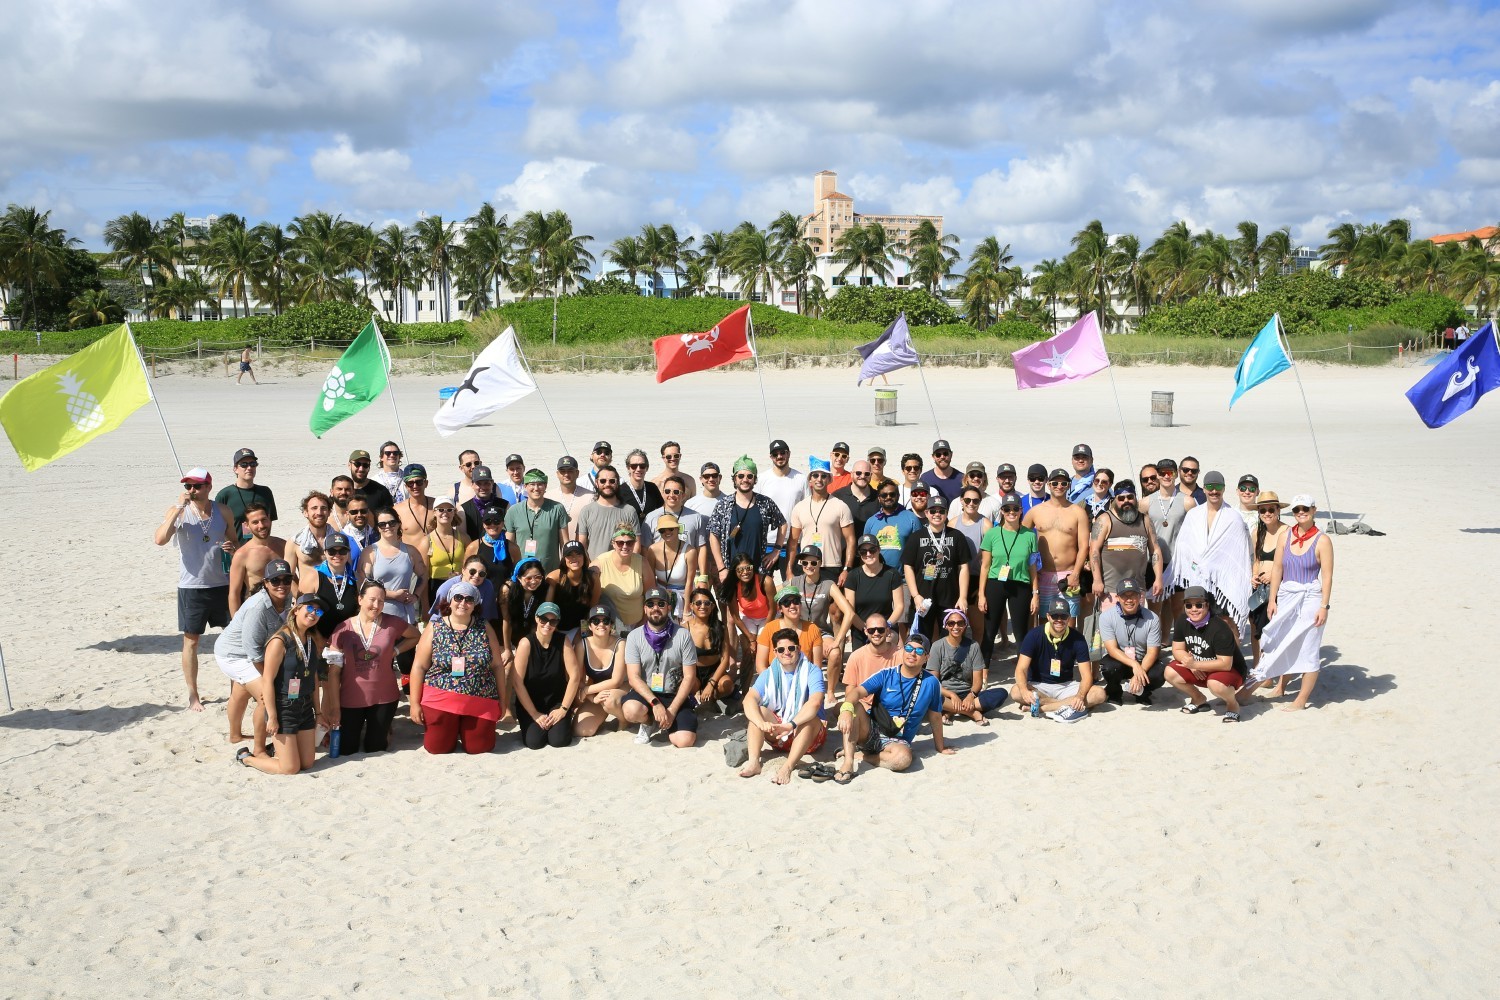 Every year the whole ClassDojo team comes together for a workaway. In 2022, the team gathered in Miami.